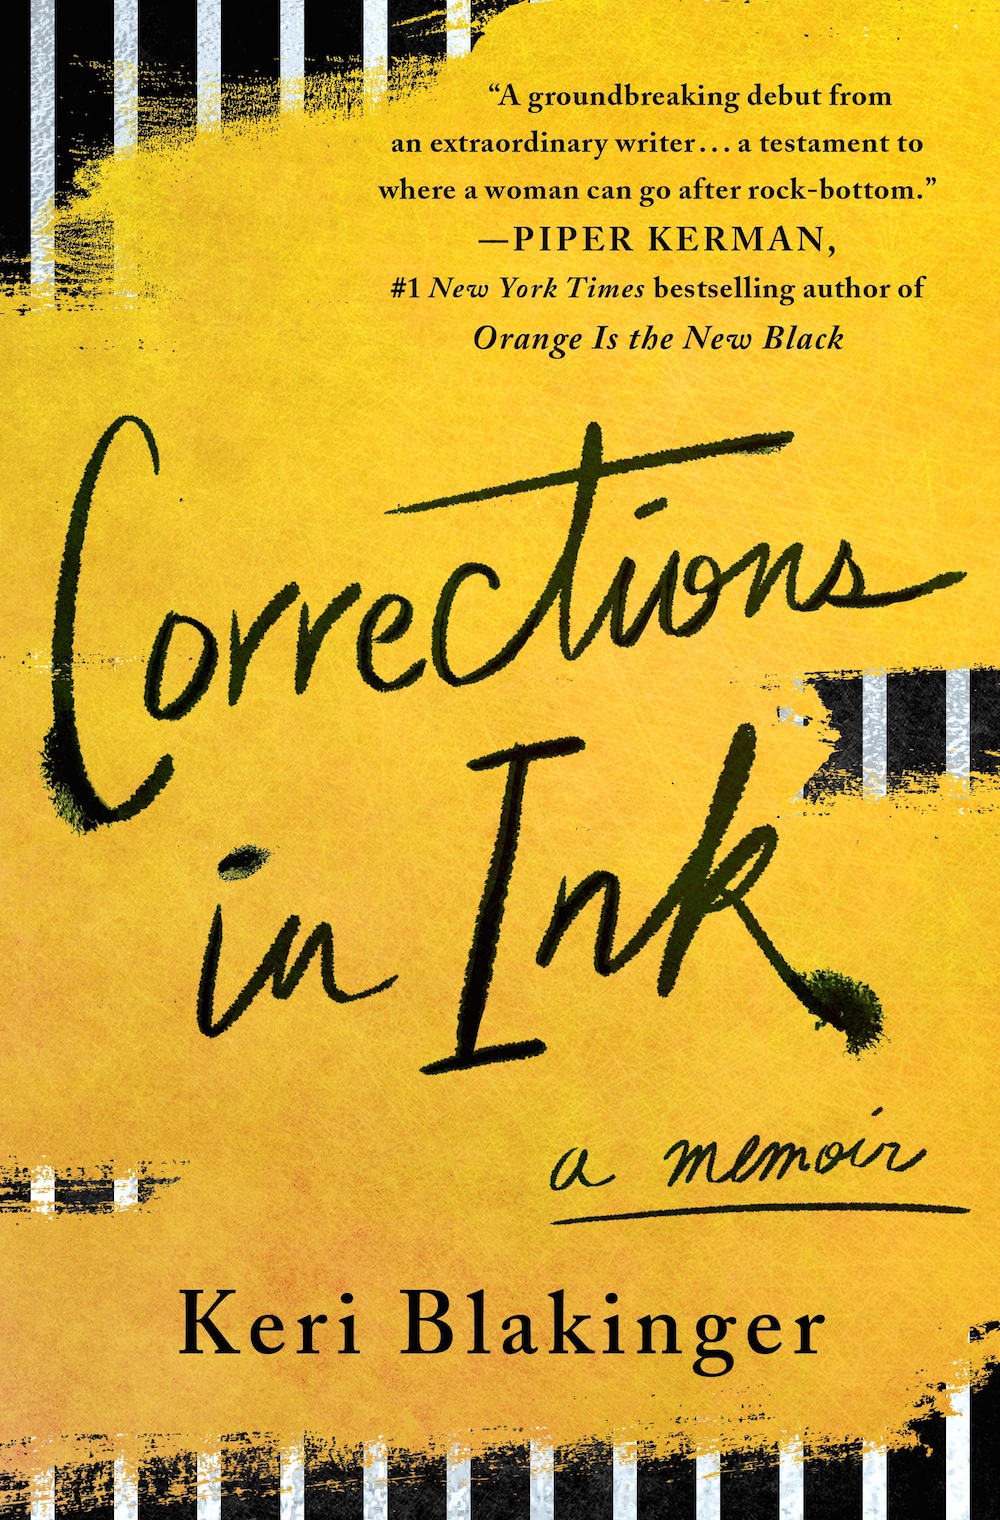 Book Launch: Corrections in Ink by Keri Blakinger, in conversation with Jodi Kantor